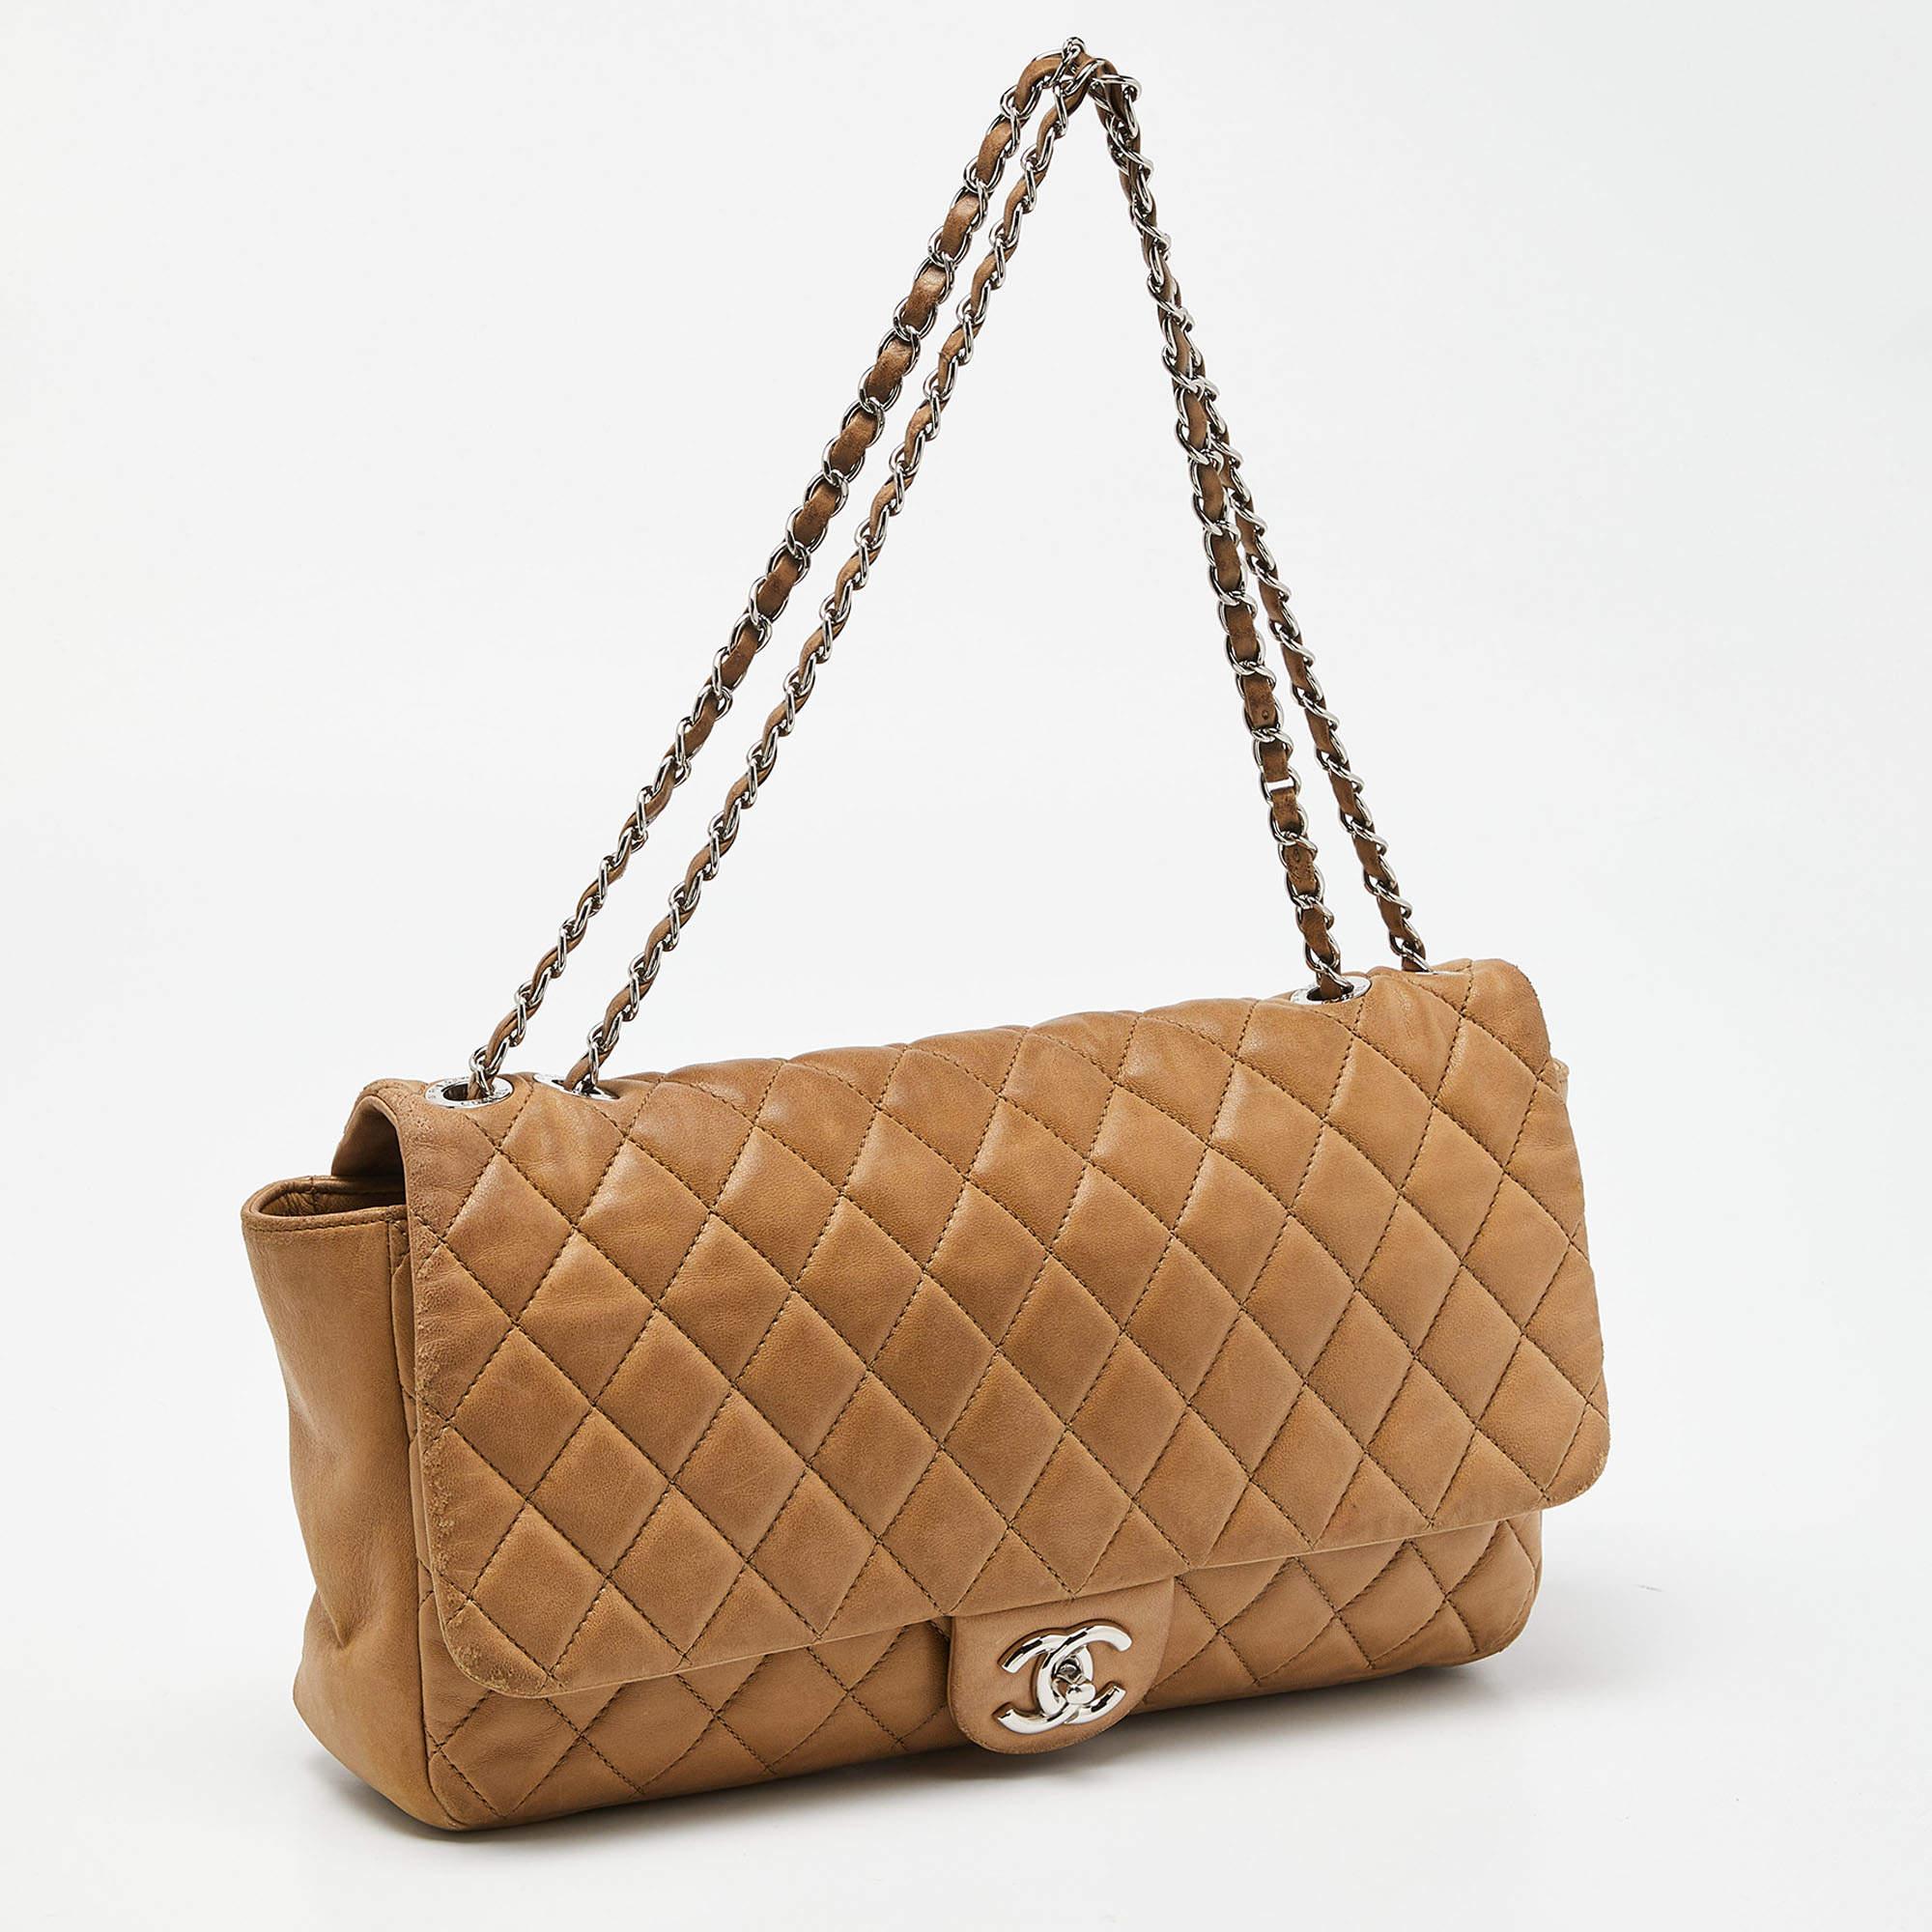 Chanel Beige Quilted Leather Jumbo Coco Rain Flap Bag 8